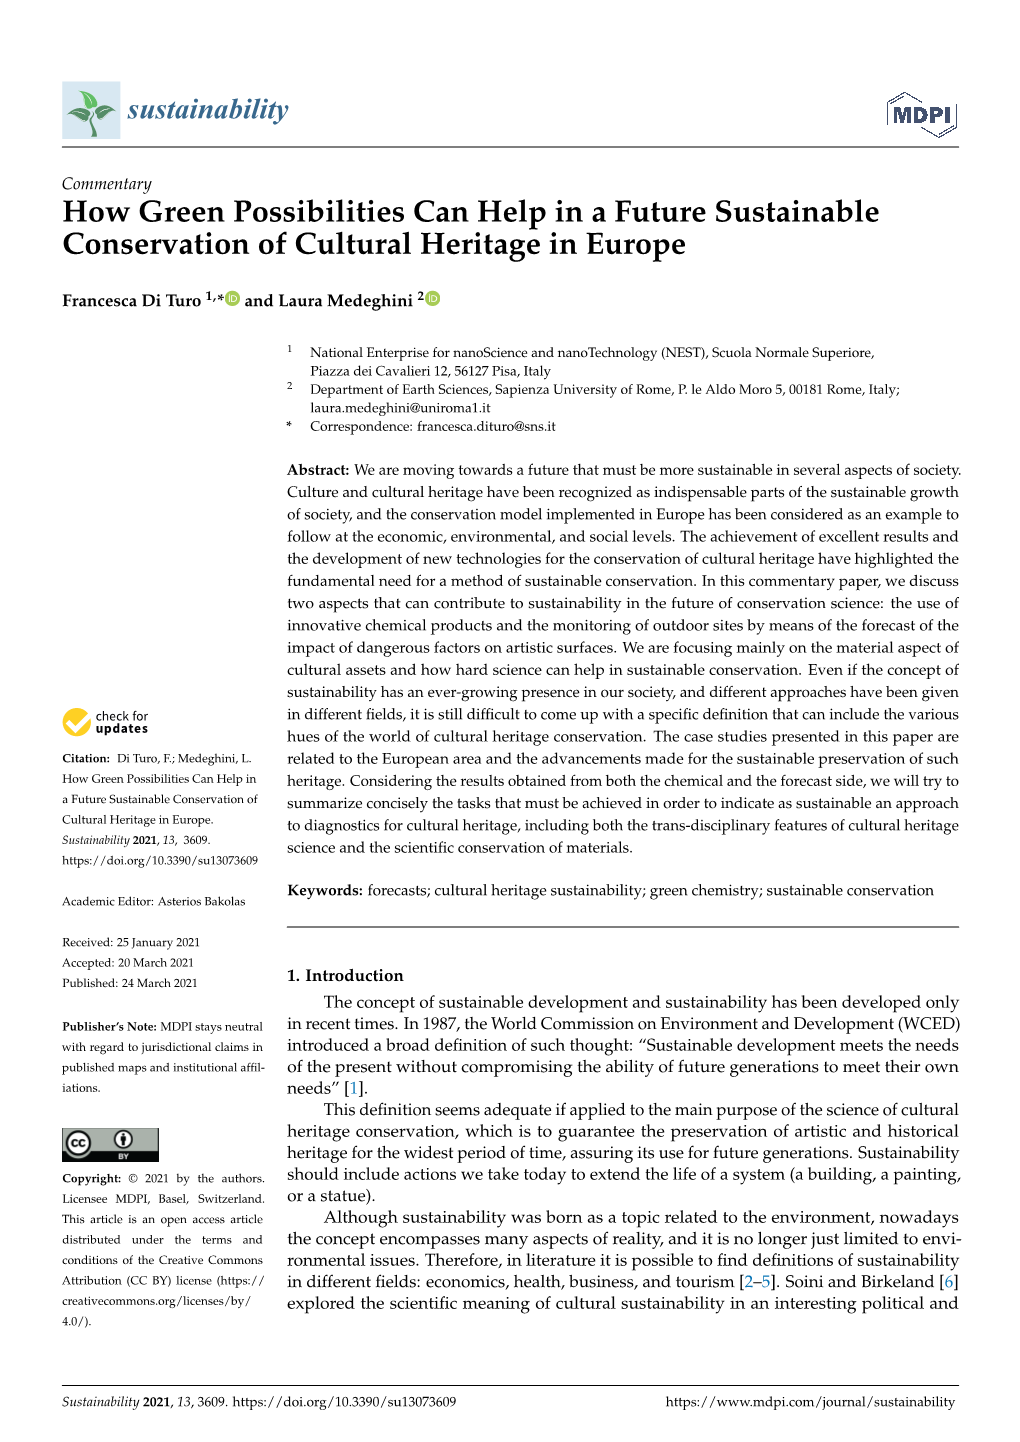 How Green Possibilities Can Help in a Future Sustainable Conservation of Cultural Heritage in Europe